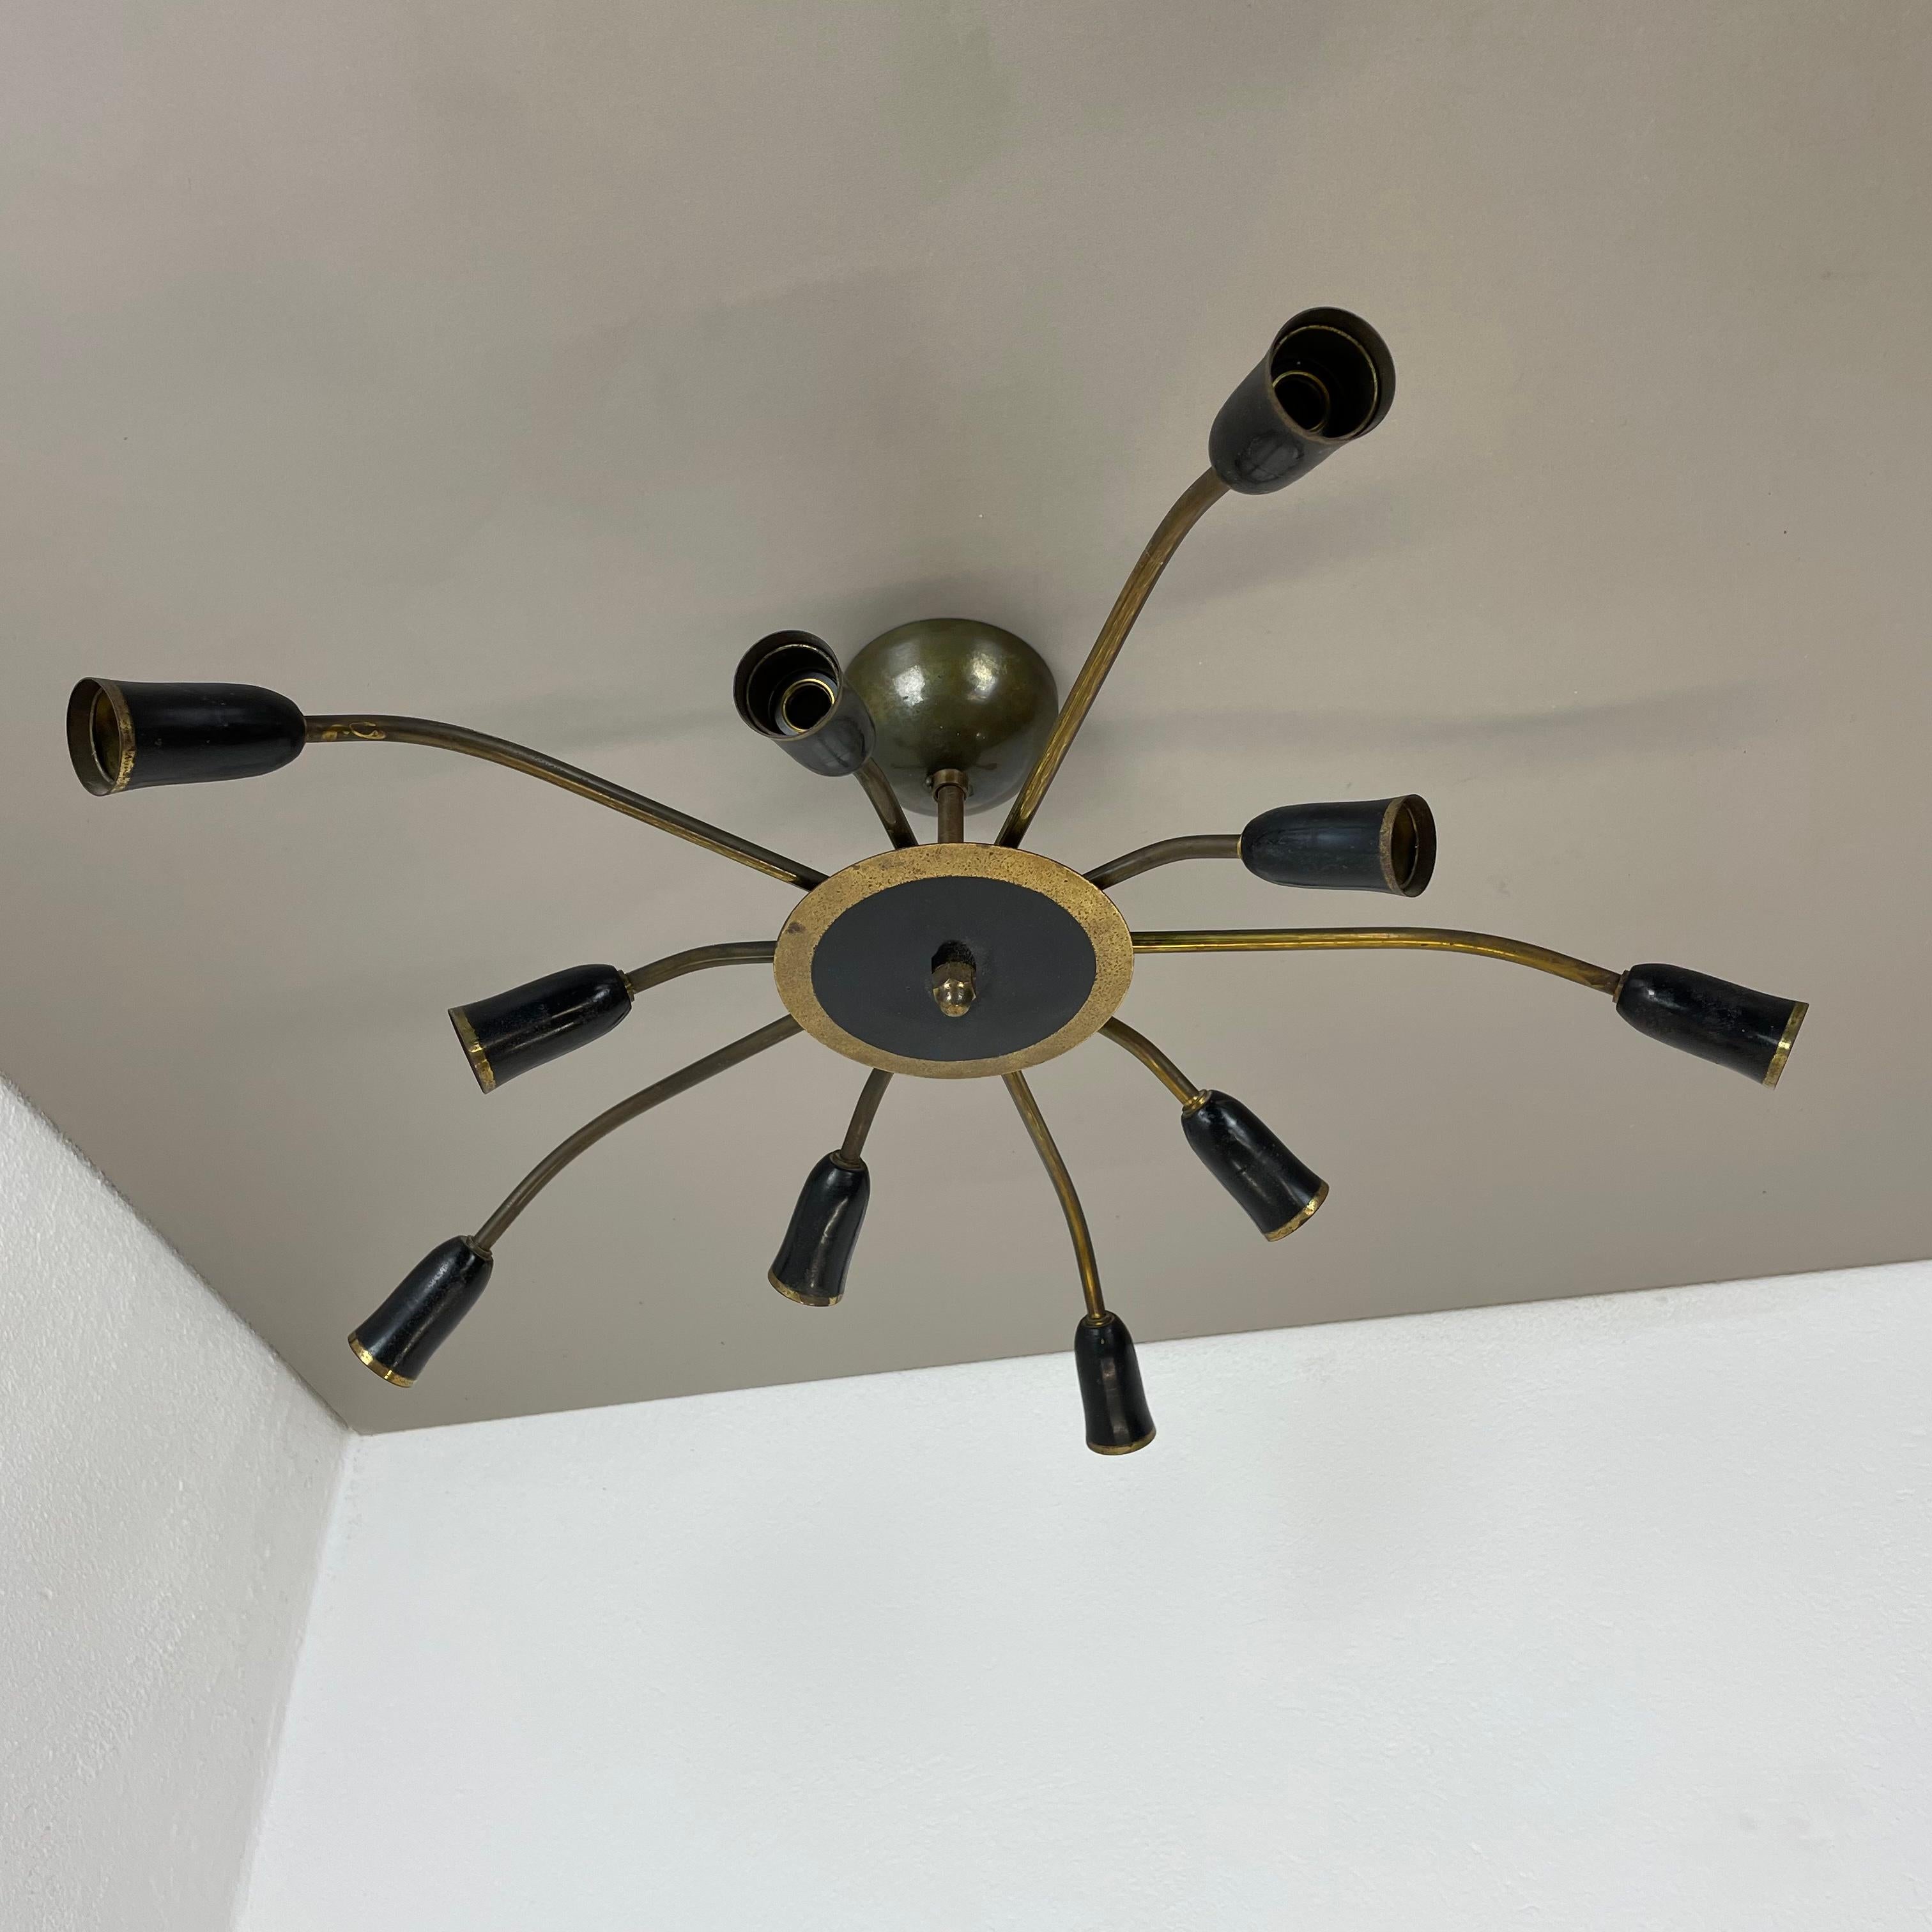 Article:

Ceiling light


Producer:

Origin Italy 
in the manner of Stilnovo, Gio Ponti



Age:

1950s



This modernist light was produced in Italy in the 1950s. It is made from solid metal brass with brass with 10 light arm